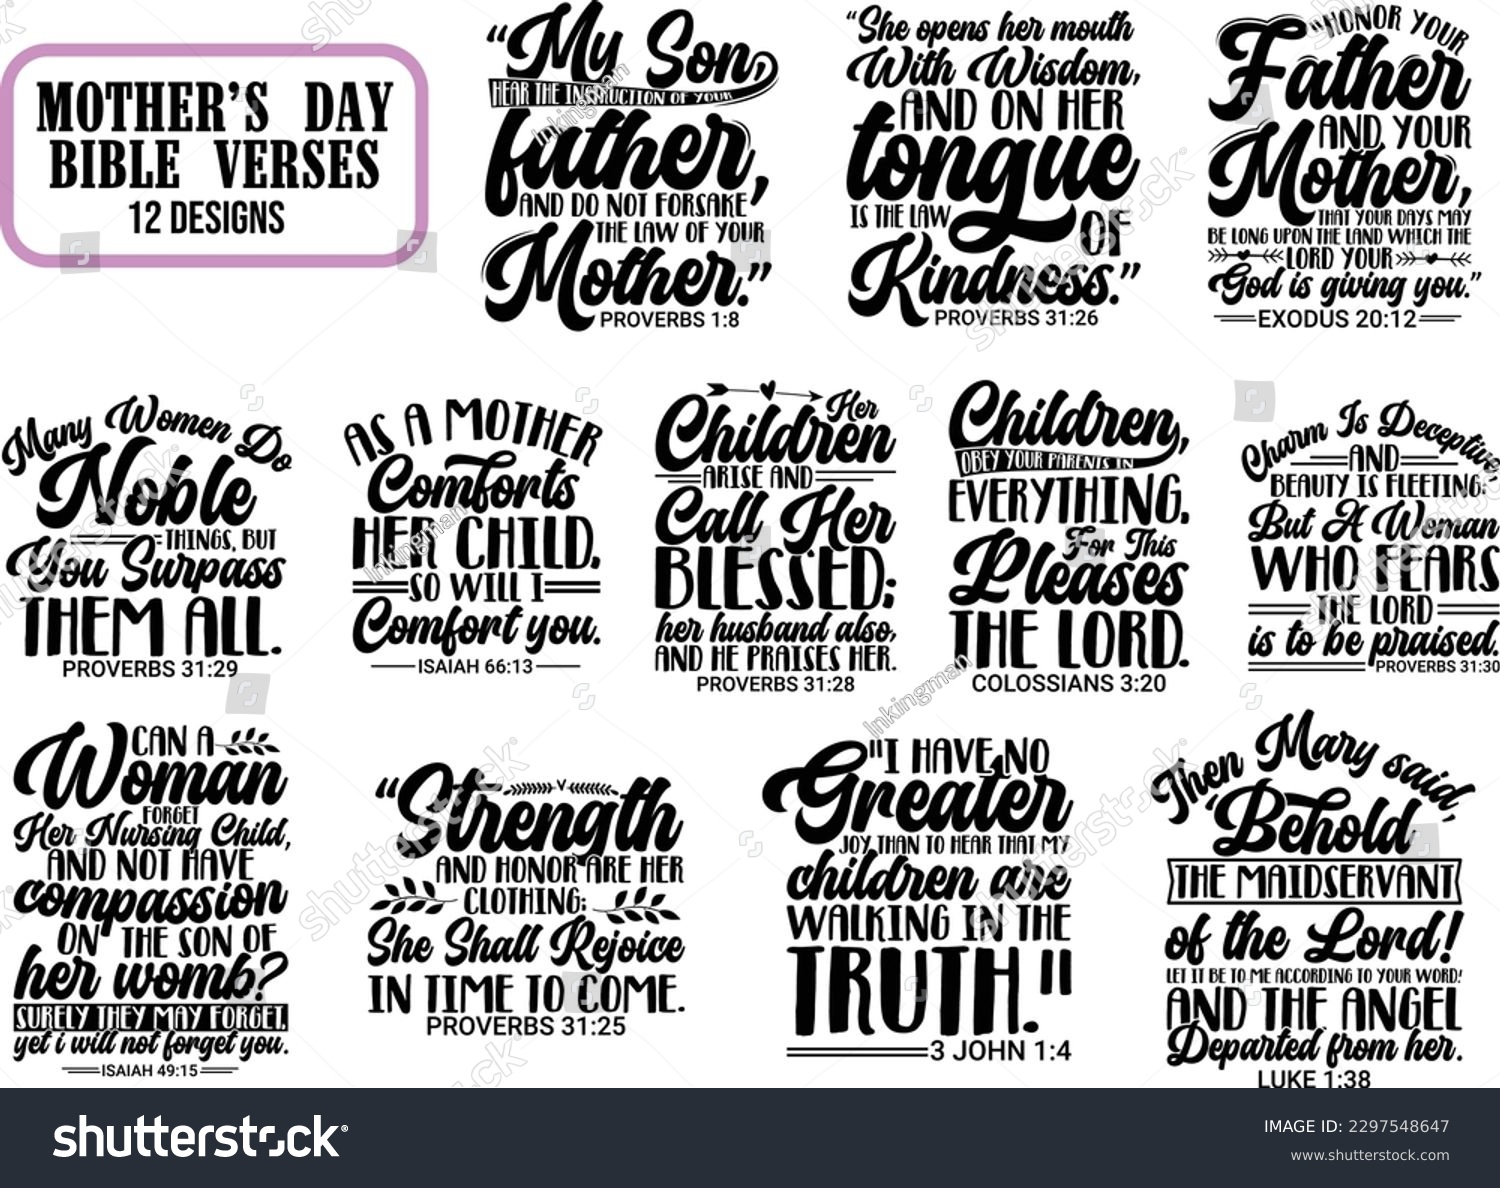 Mother's Day Bible Verse, mother quote, mom day, - Royalty Free Stock ...